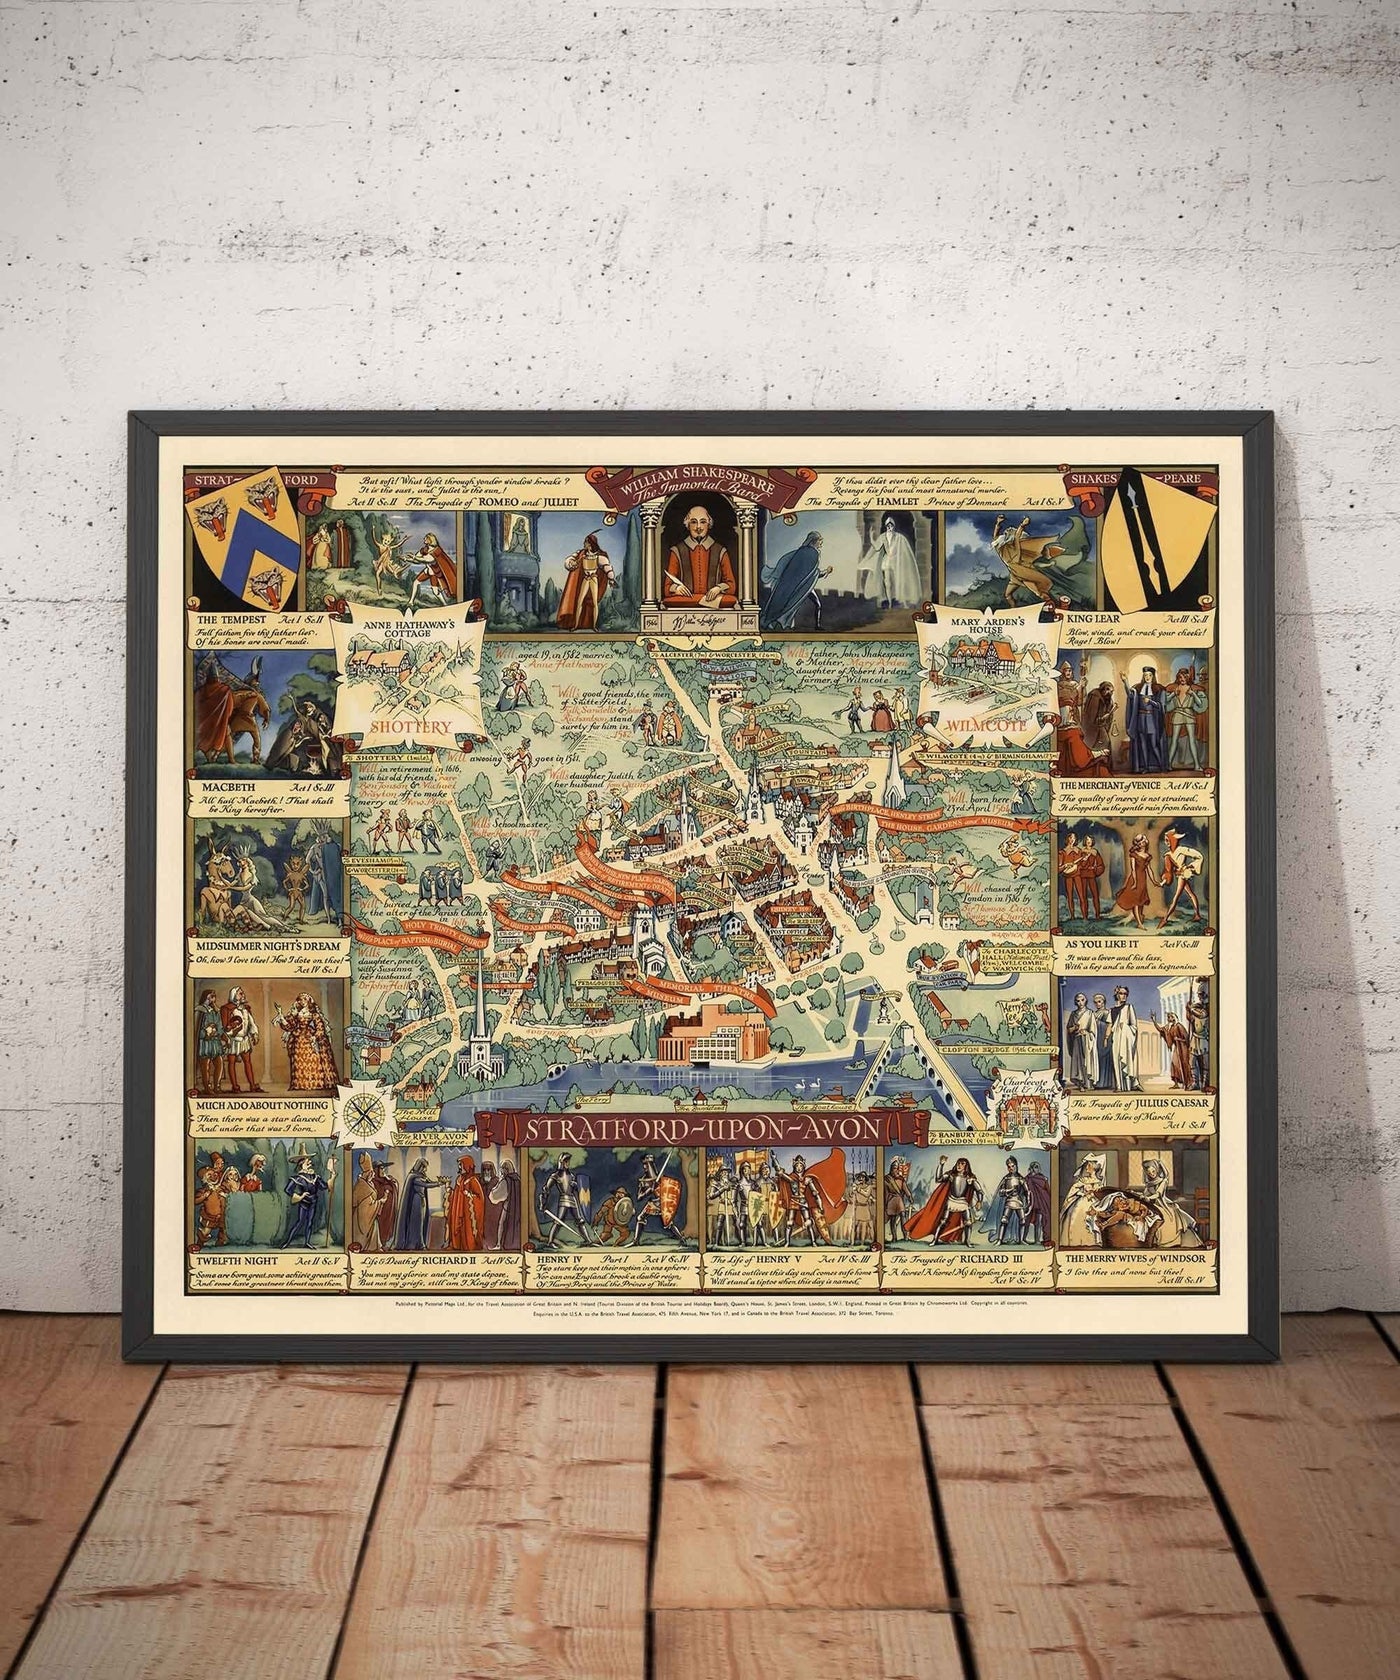 Old Pictorial Map of Stratford Upon Avon, 1948 by Kerry Lee - Shakespeare, Theatre, Plays, Nash's House, Poet's Landmarks